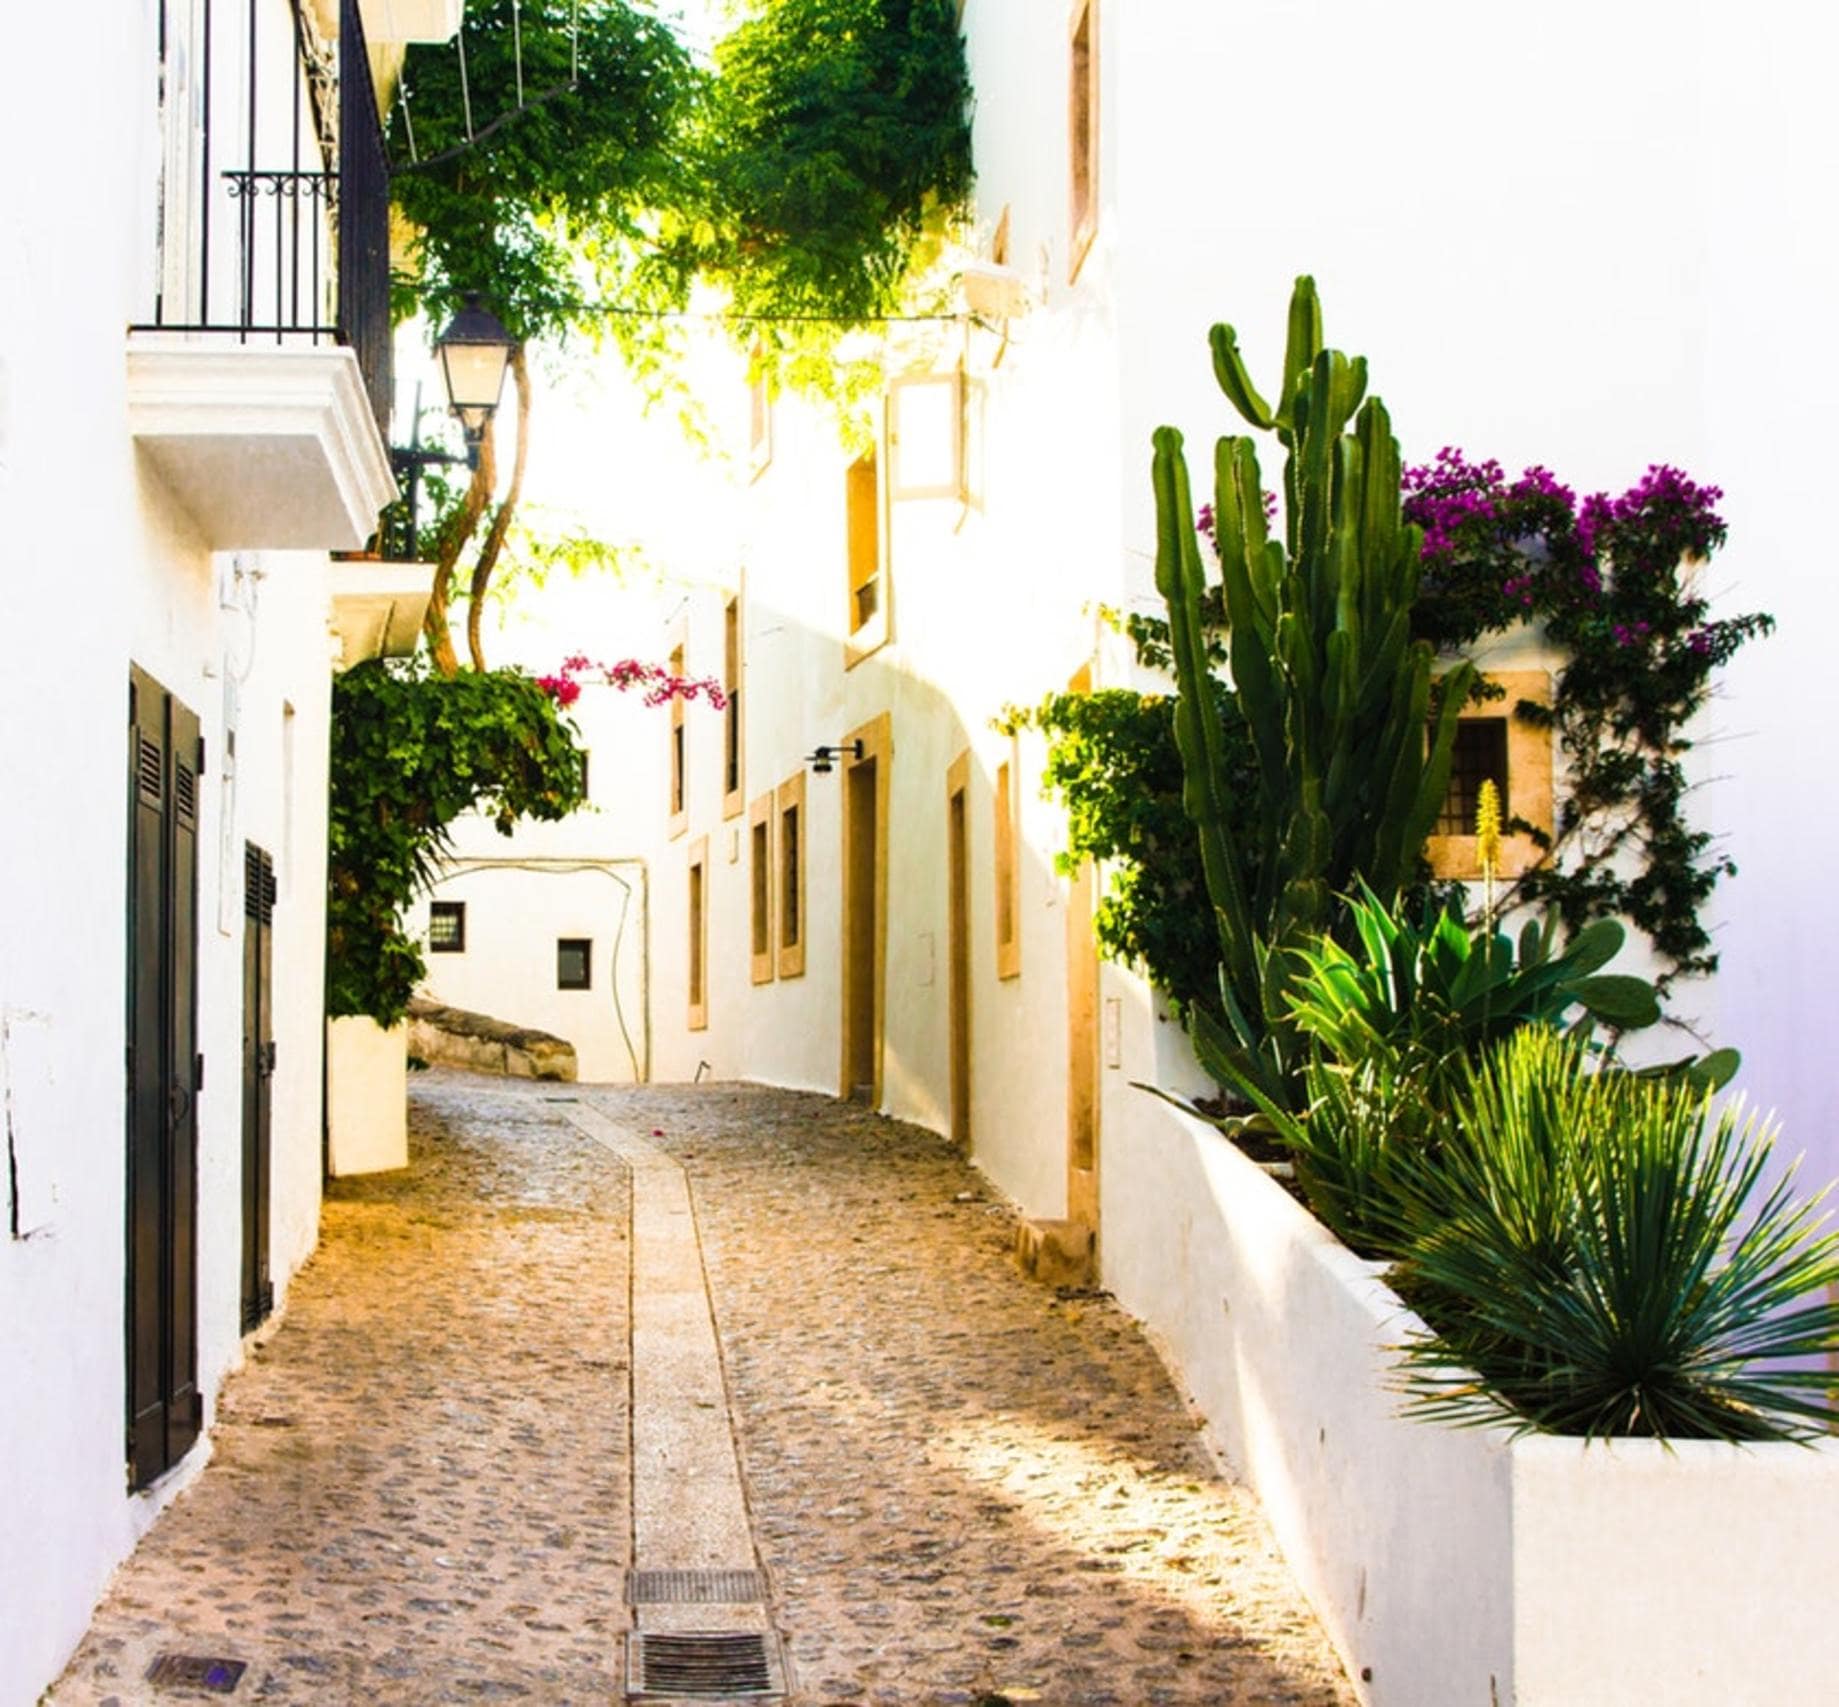 A whitewashed row of typical Ibiza apartments and houses in Ibiza Town